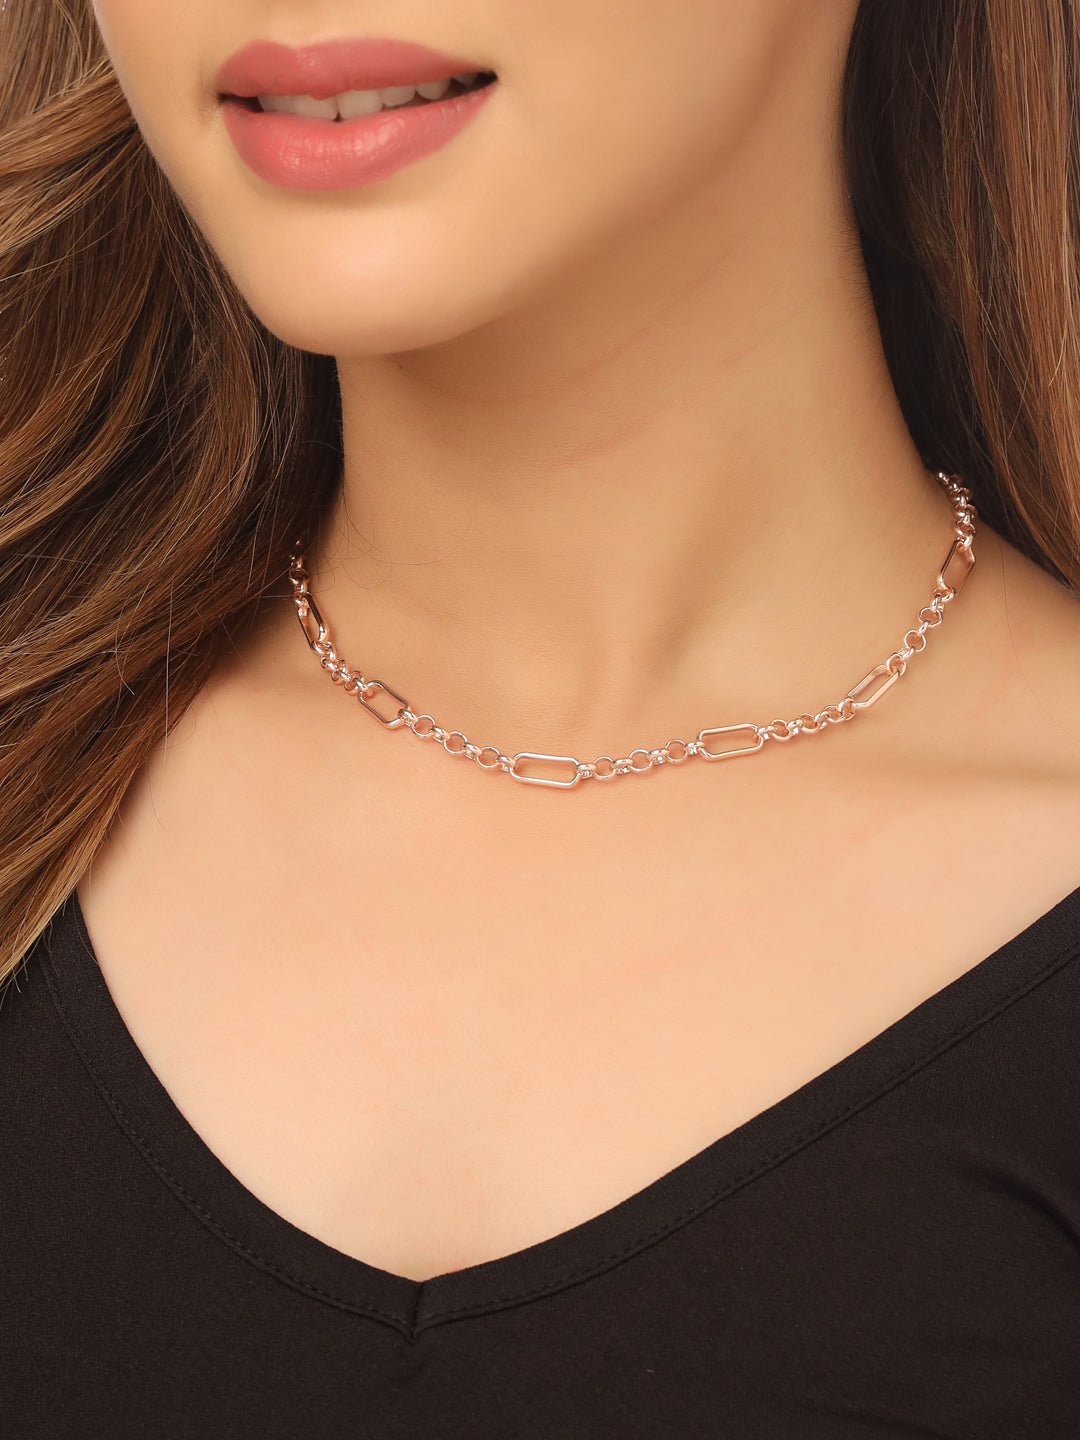 Women's Rose Gold Plated Minimal Necklace - NVR